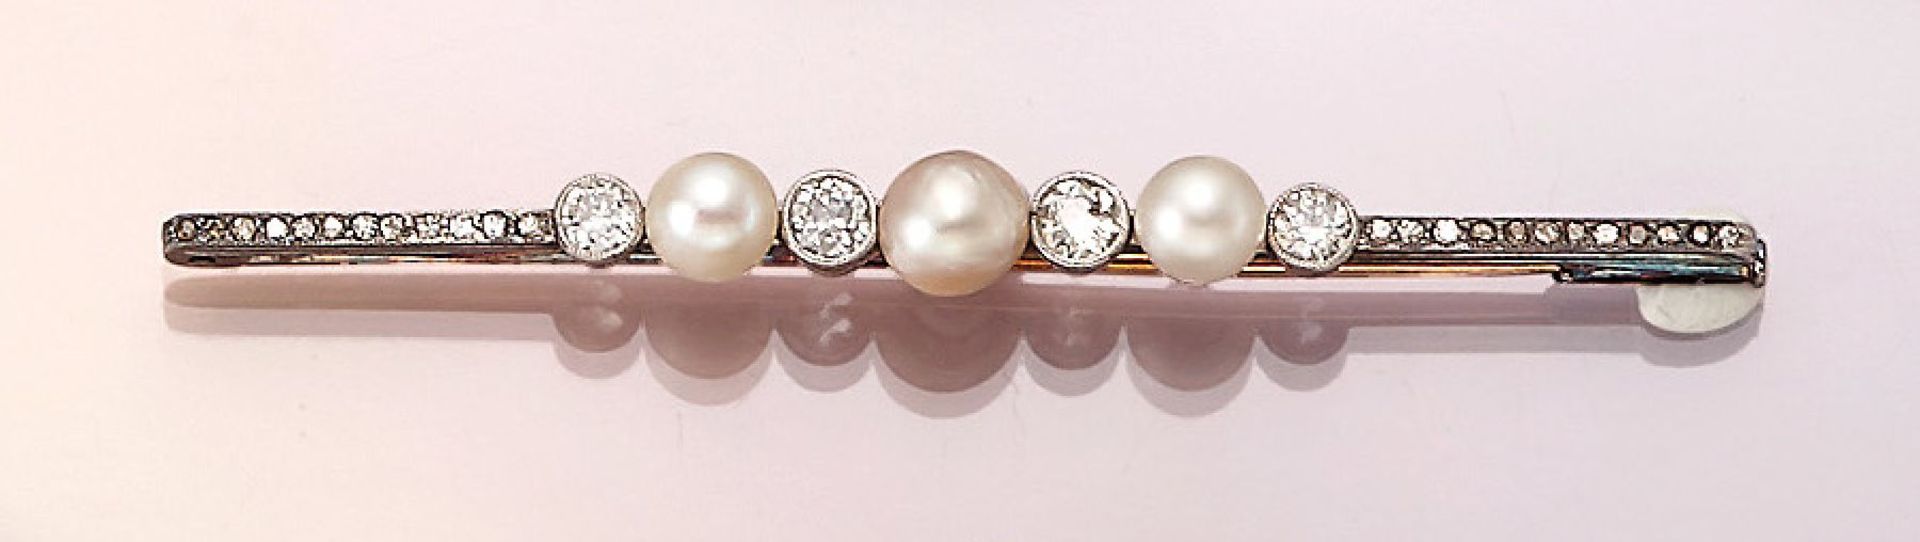 Art Nouveau brooch with pearls and diamonds , YG 585/000 and silver, approx. 1900s, 3 white orient